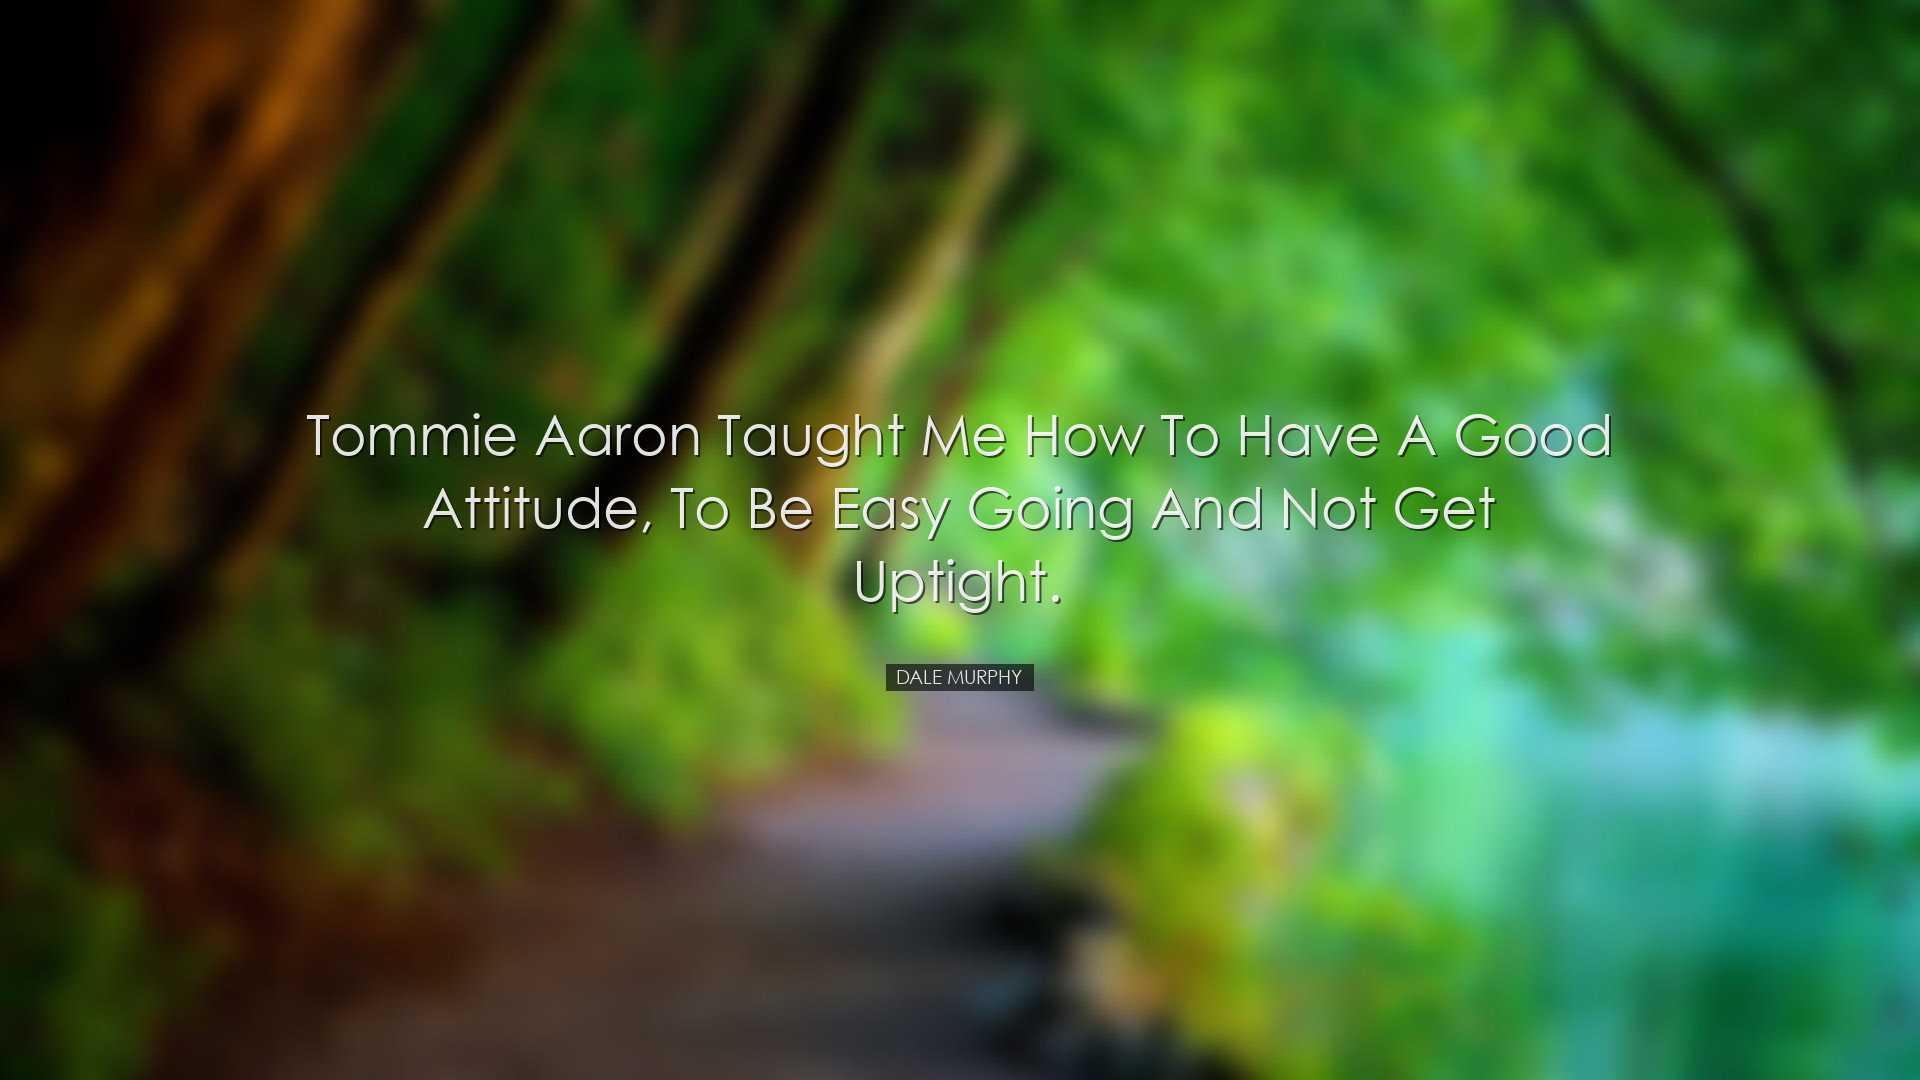 Tommie Aaron taught me how to have a good attitude, to be easy goi